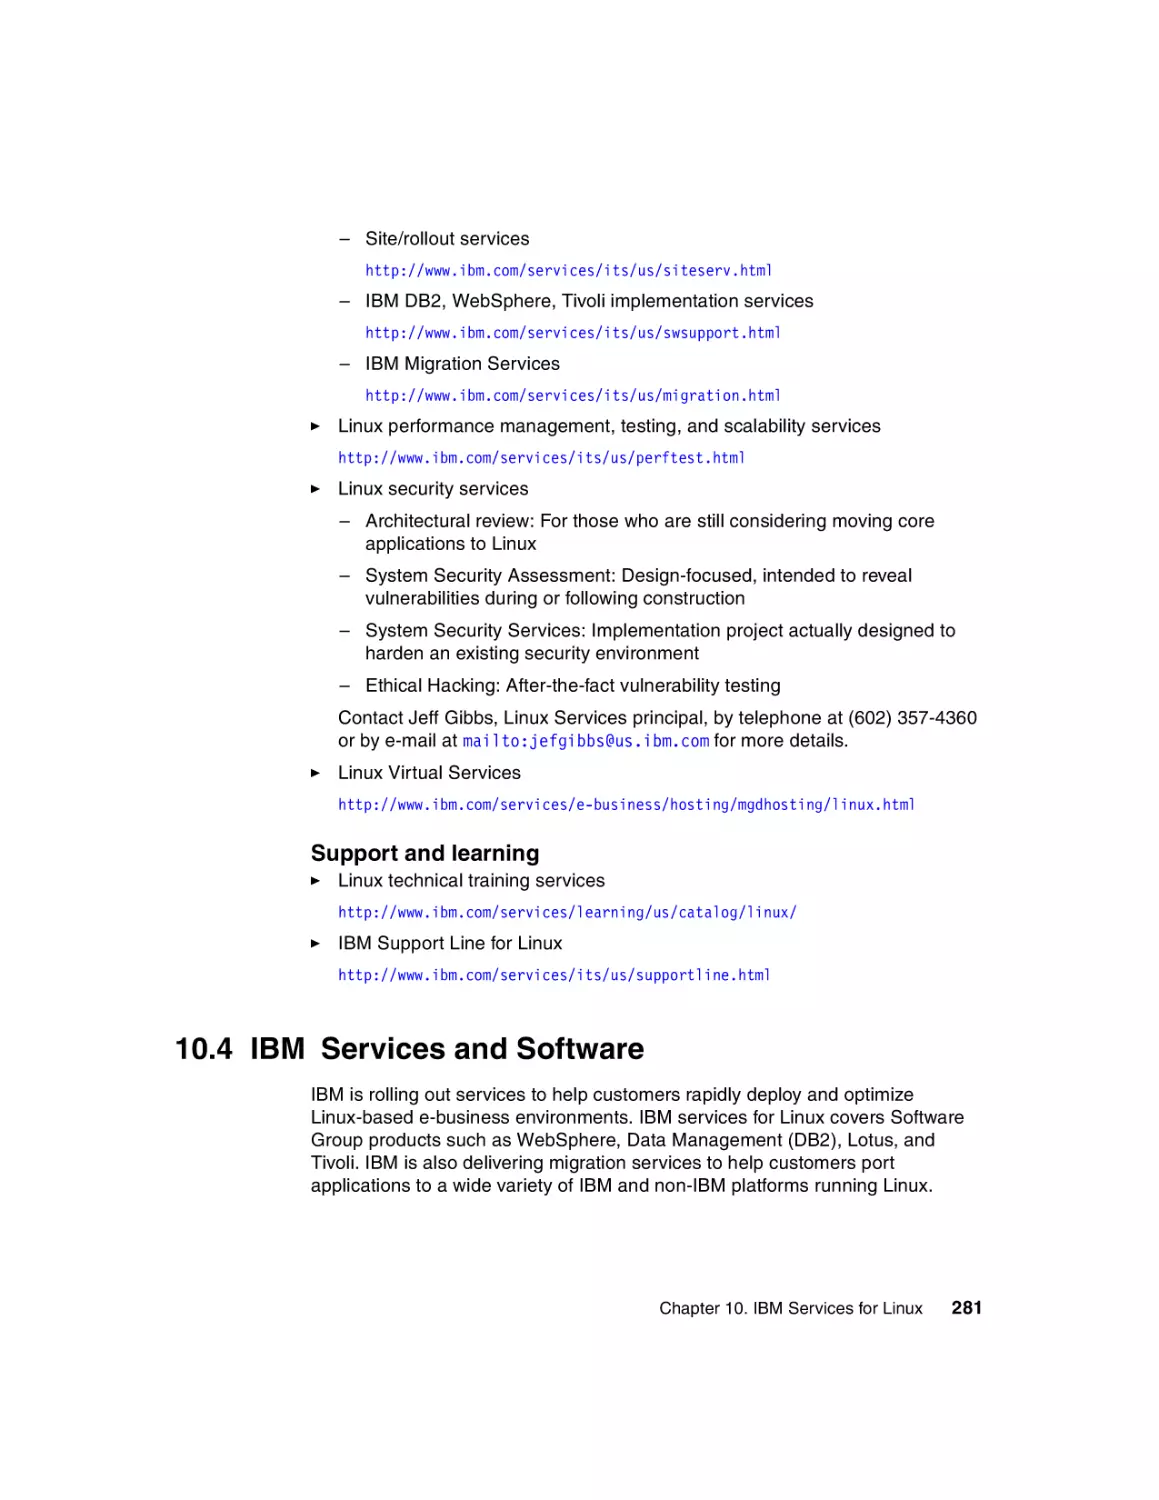 10.4 IBM Services and Software